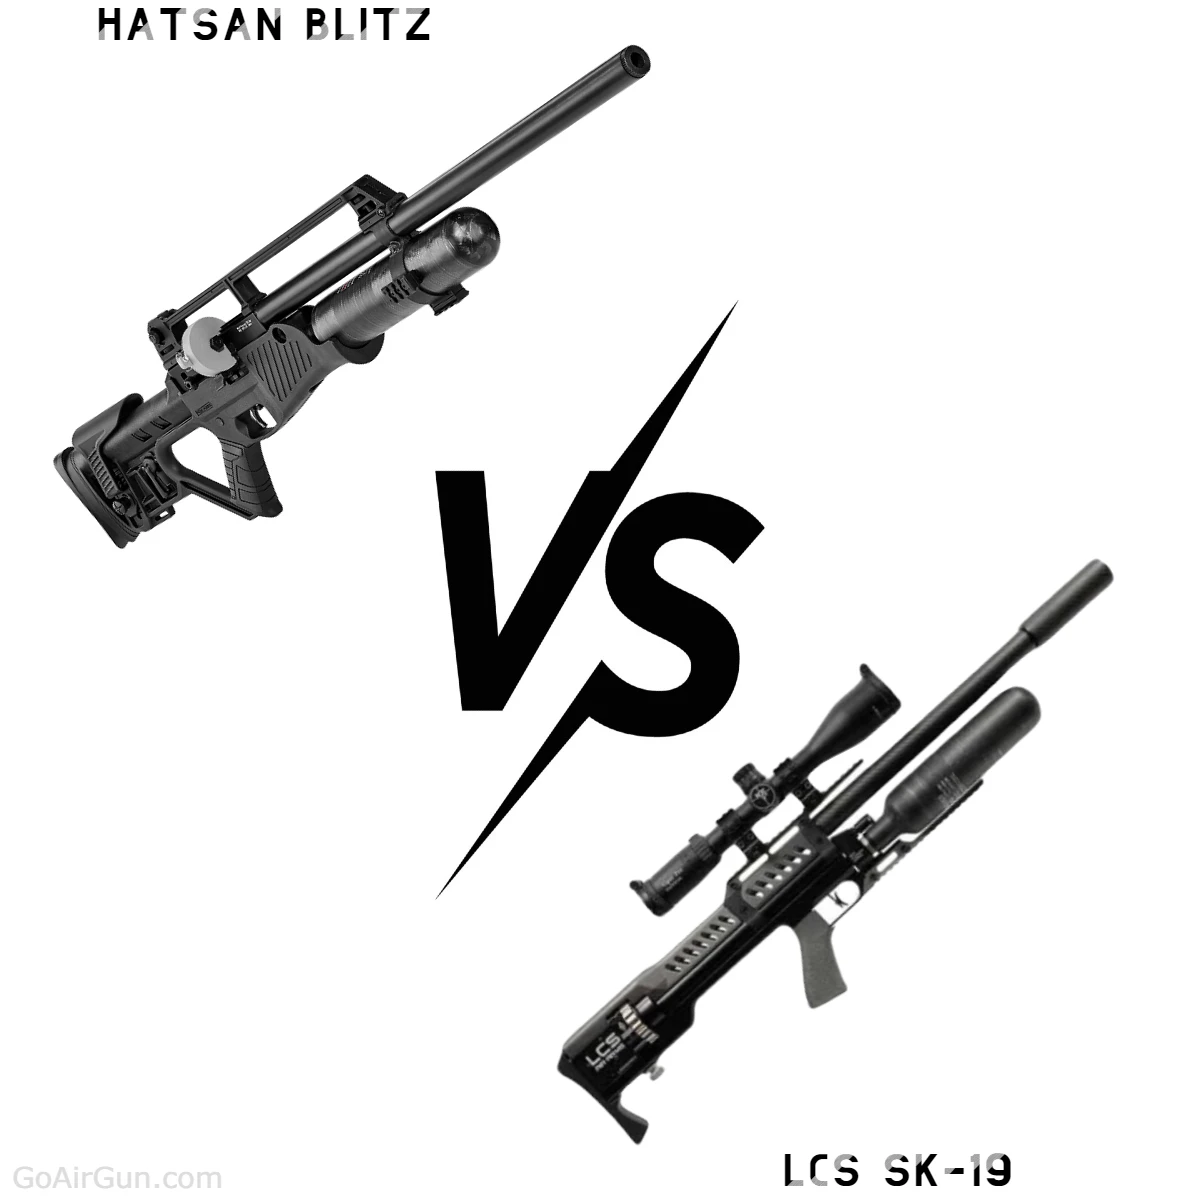 Differences Between LCS Sk 19 and Hatsan Blitz